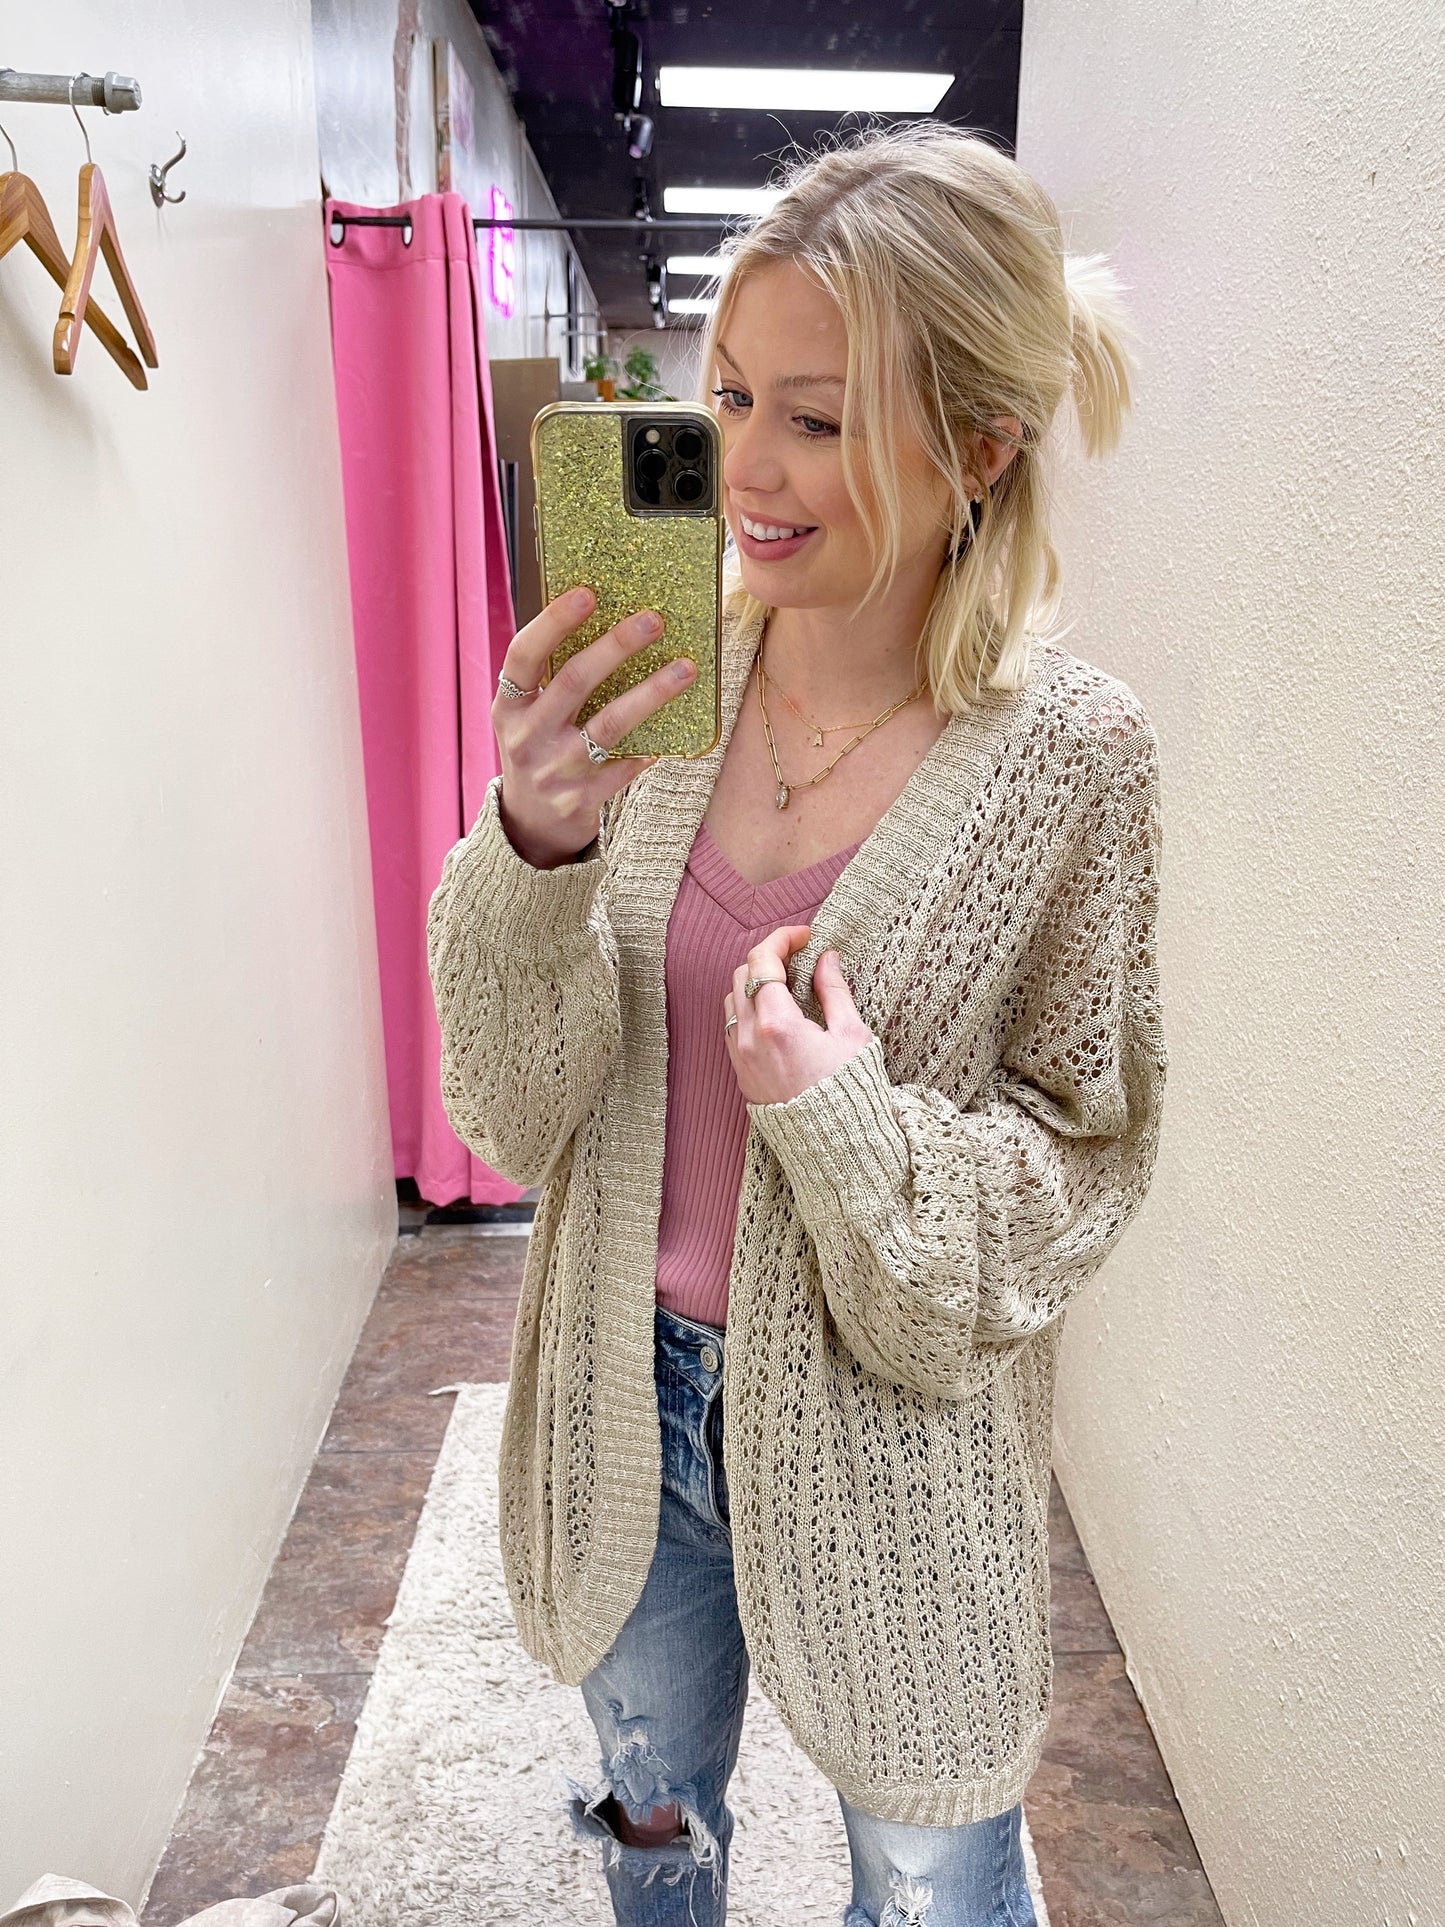 Taupe Open Casual Cardigan